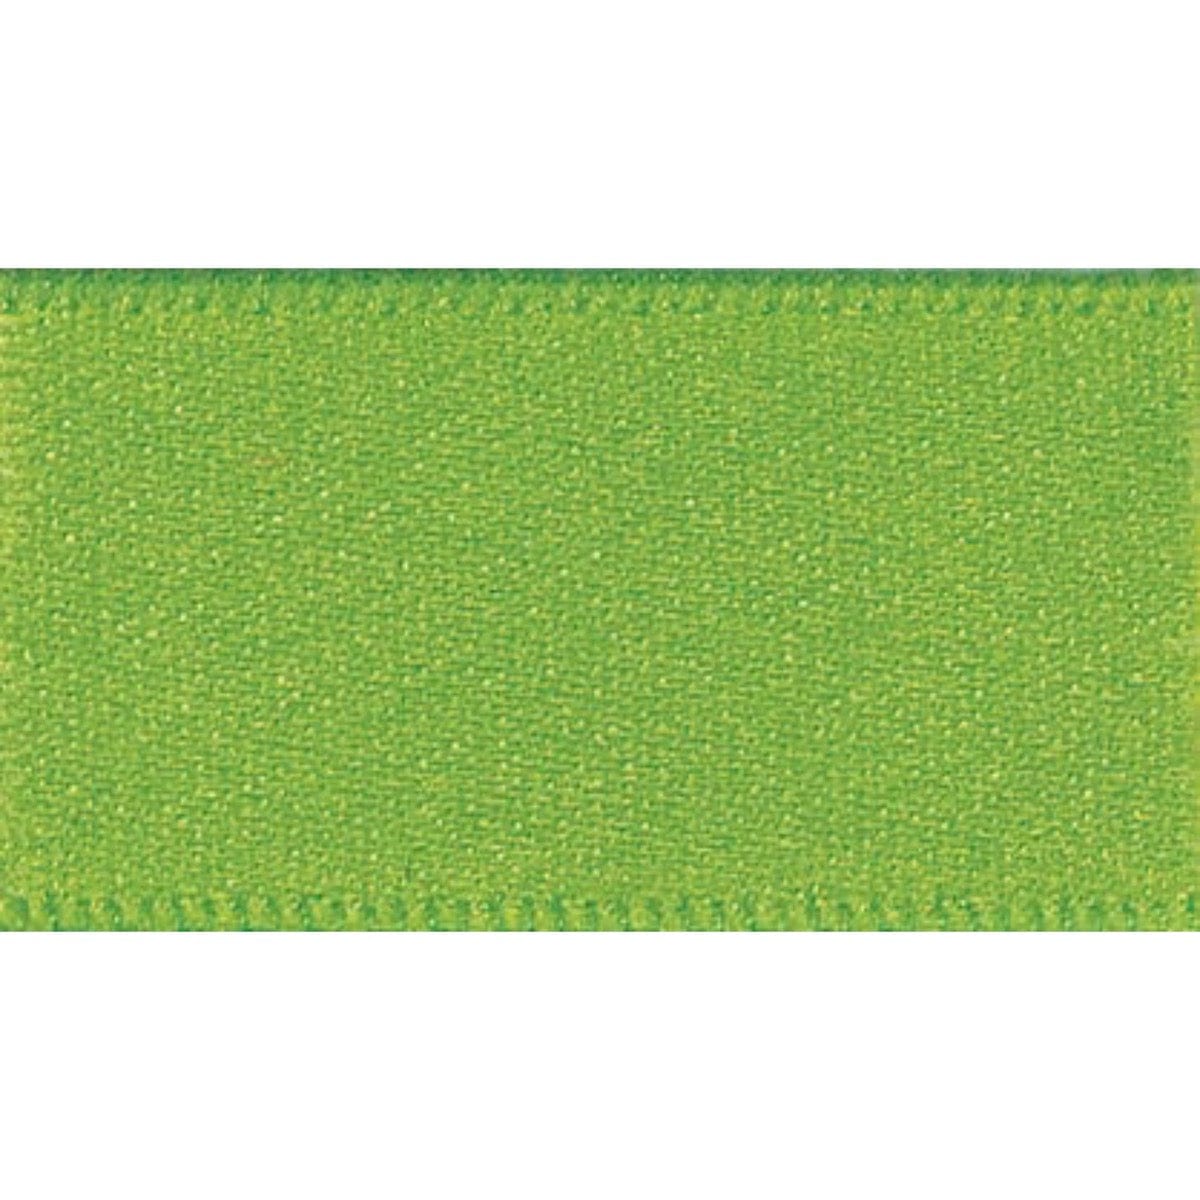 Double Faced Satin Ribbon: Meadow Green: 7mm wide. Price per metre.